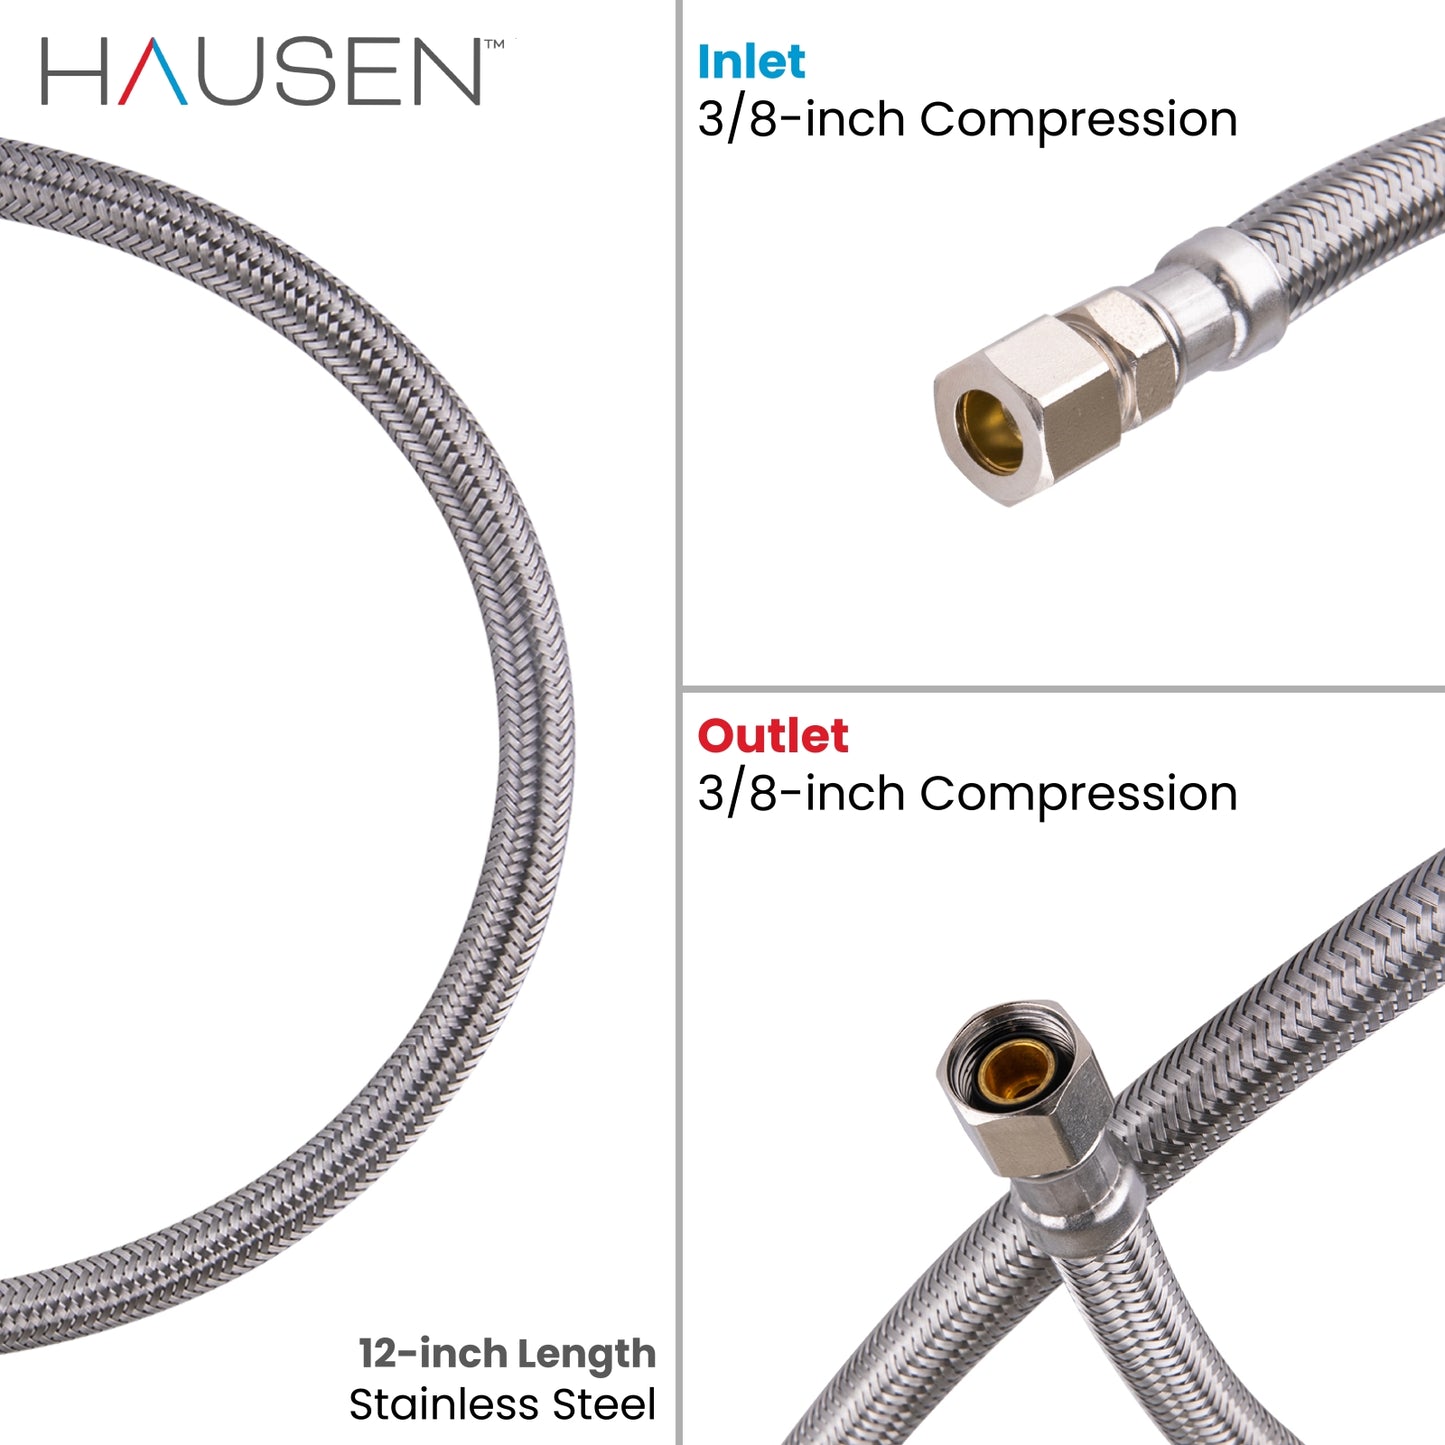 Hausen 3/8-inch Compression x 3/8-inch Compression x 12-inch Length Stainless Steel Faucet Water Supply Connector; Lead Free; cUPC and NSF-61 Certified; Compatible with Standard Faucets, 6-Pack